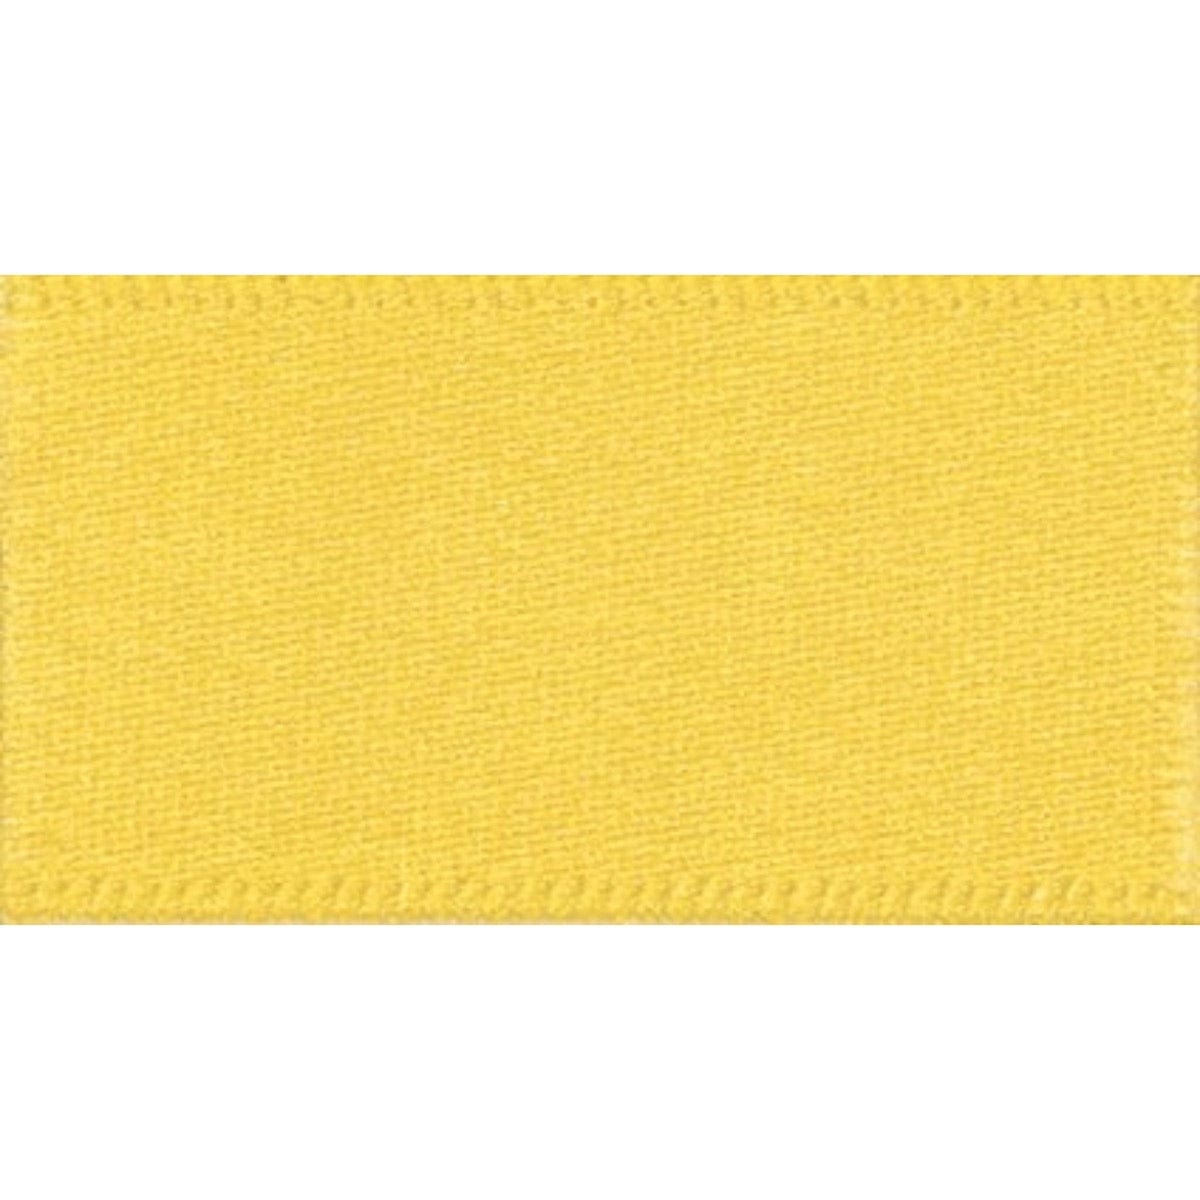 Double Faced Satin Ribbon Yellow: 25mm wide. Price per metre.